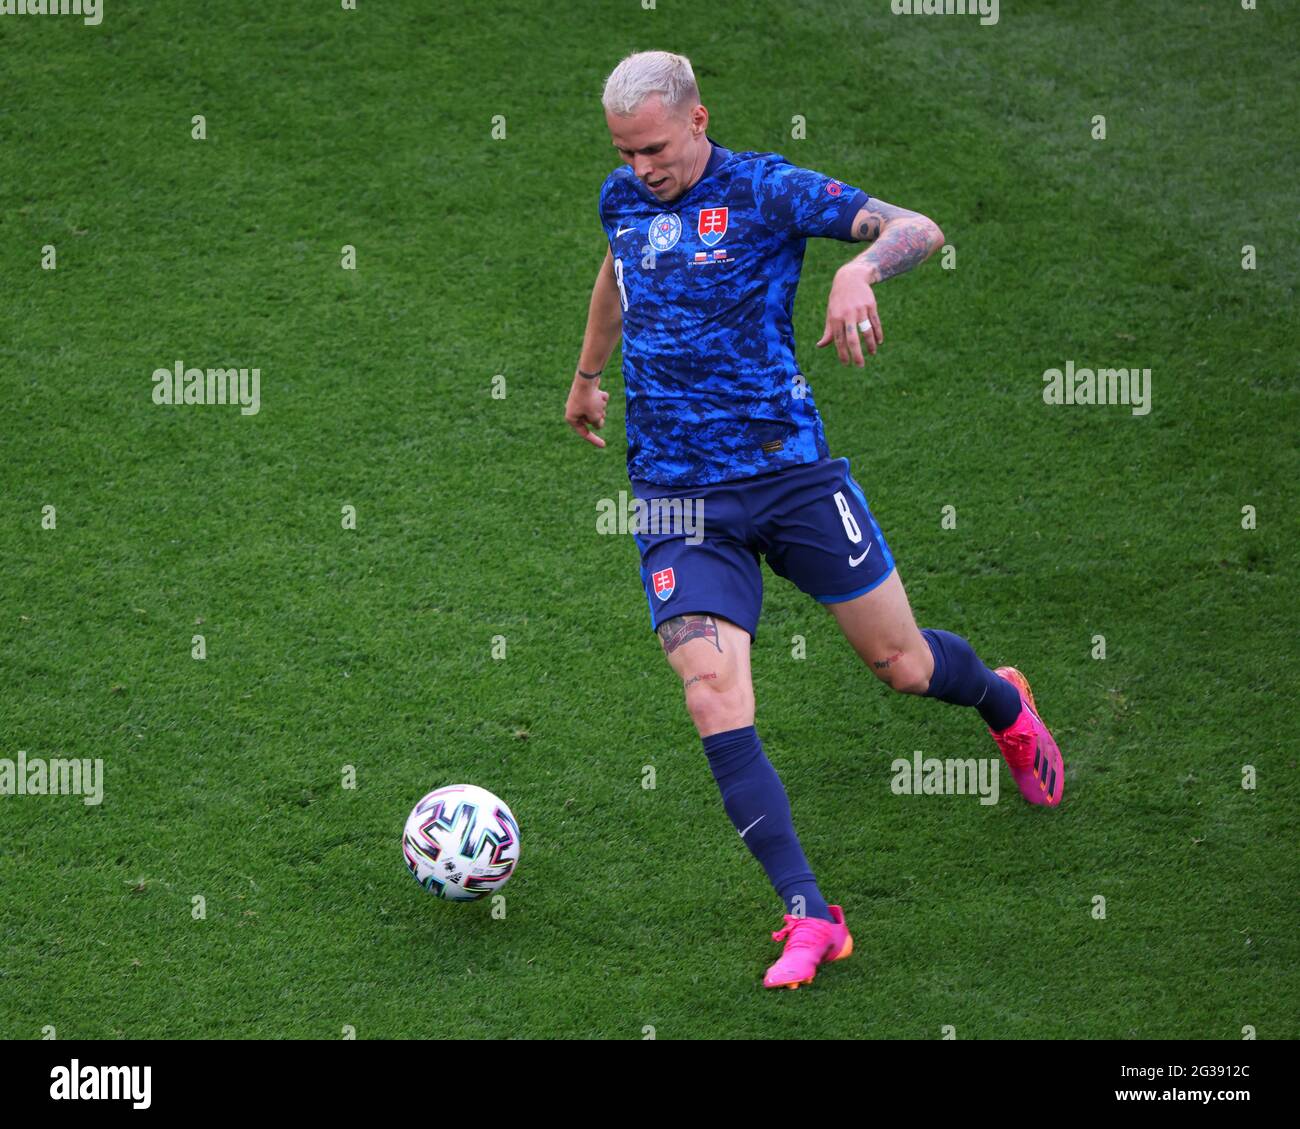 Saint Petersburg, Russia. 14th June, 2021. Ondrej Duda of Slovakia seen in action during the European championship EURO 2020 between Poland and Slovakia at Gazprom Arena.(Final Score; Poland 1:2 Slovakia). Credit: SOPA Images Limited/Alamy Live News Stock Photo